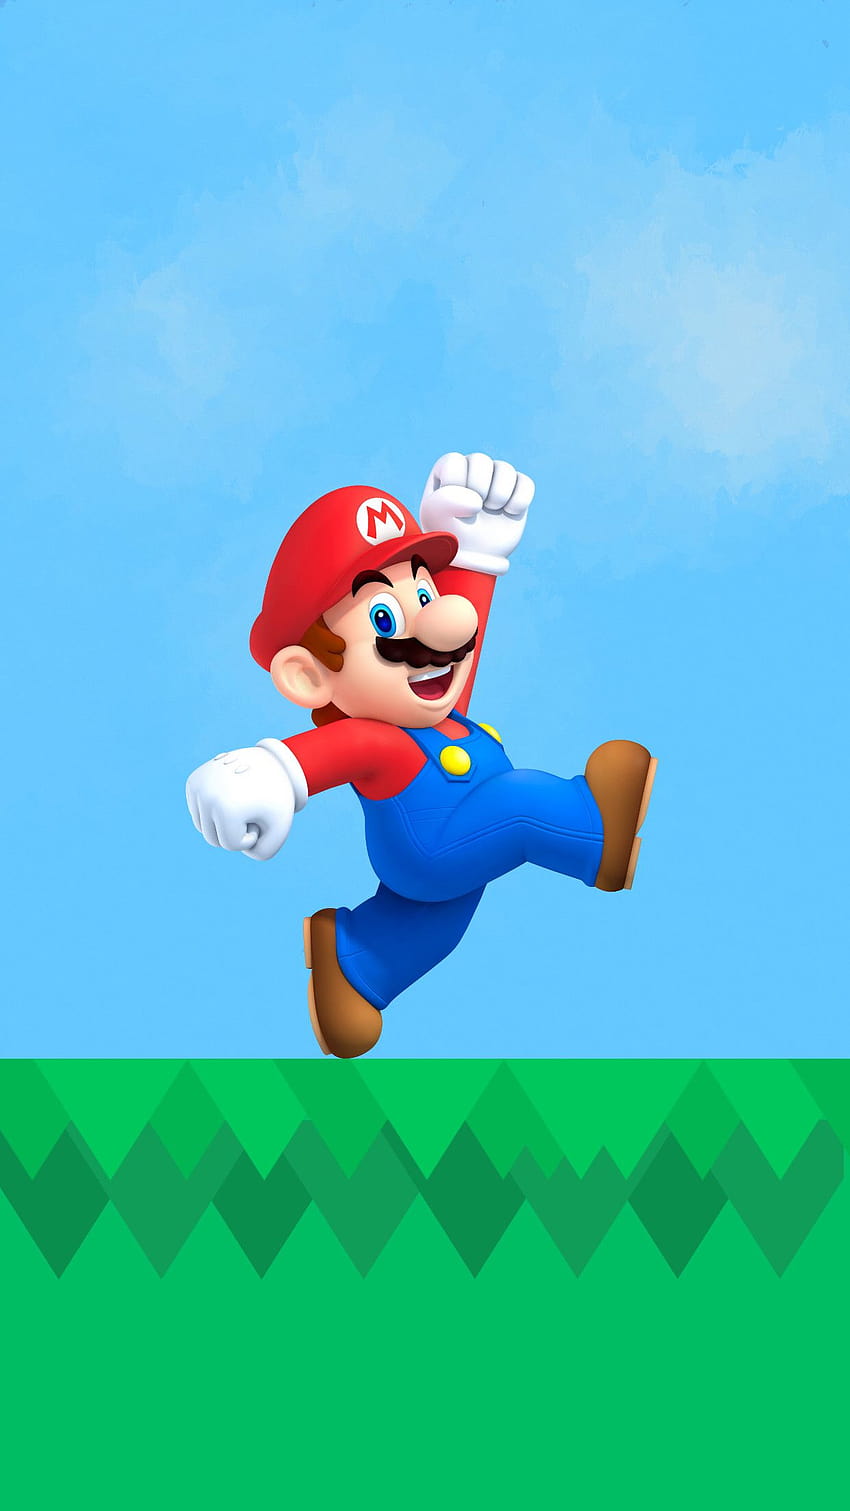 Android, iPhone, Backgrounds ...99, super mario 64 iphone HD phone wallpaper